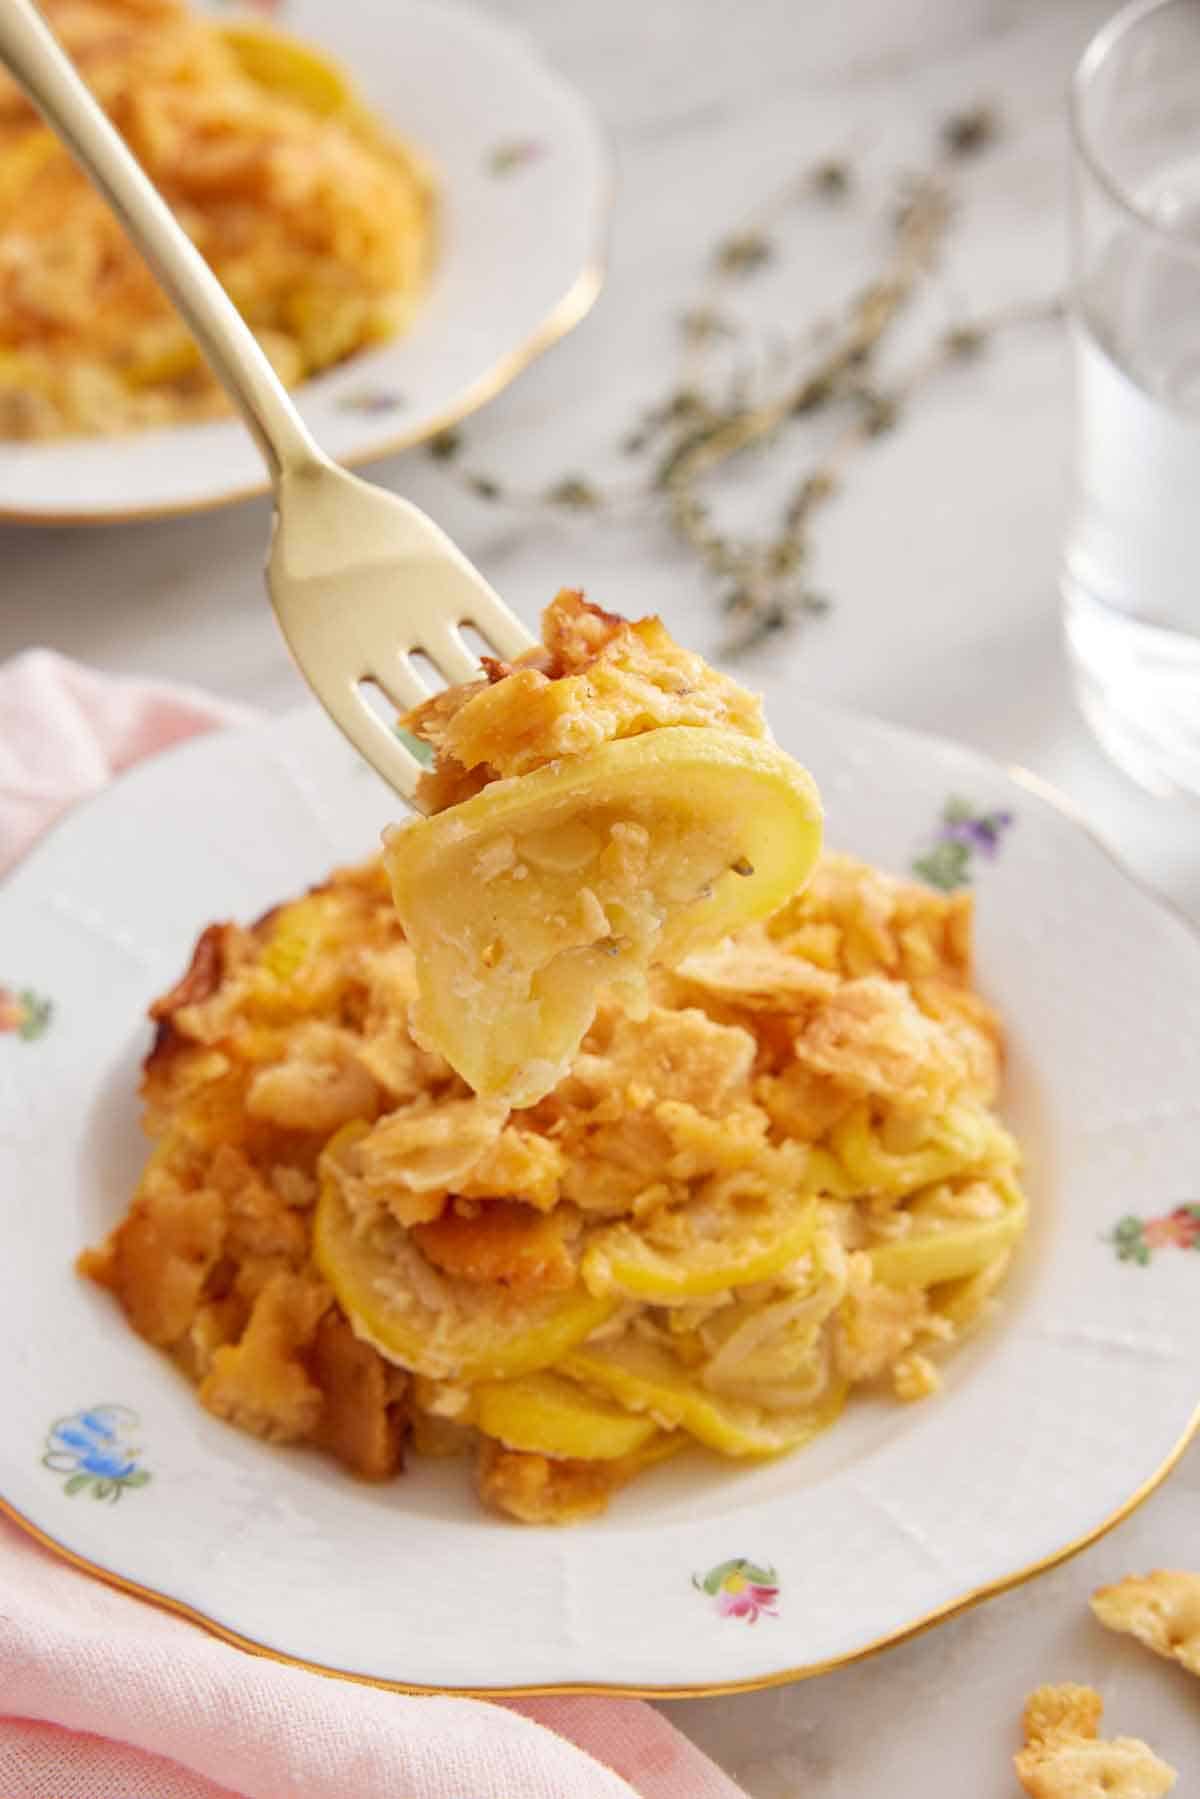 A forkful of squash casserole lifted from a plate.